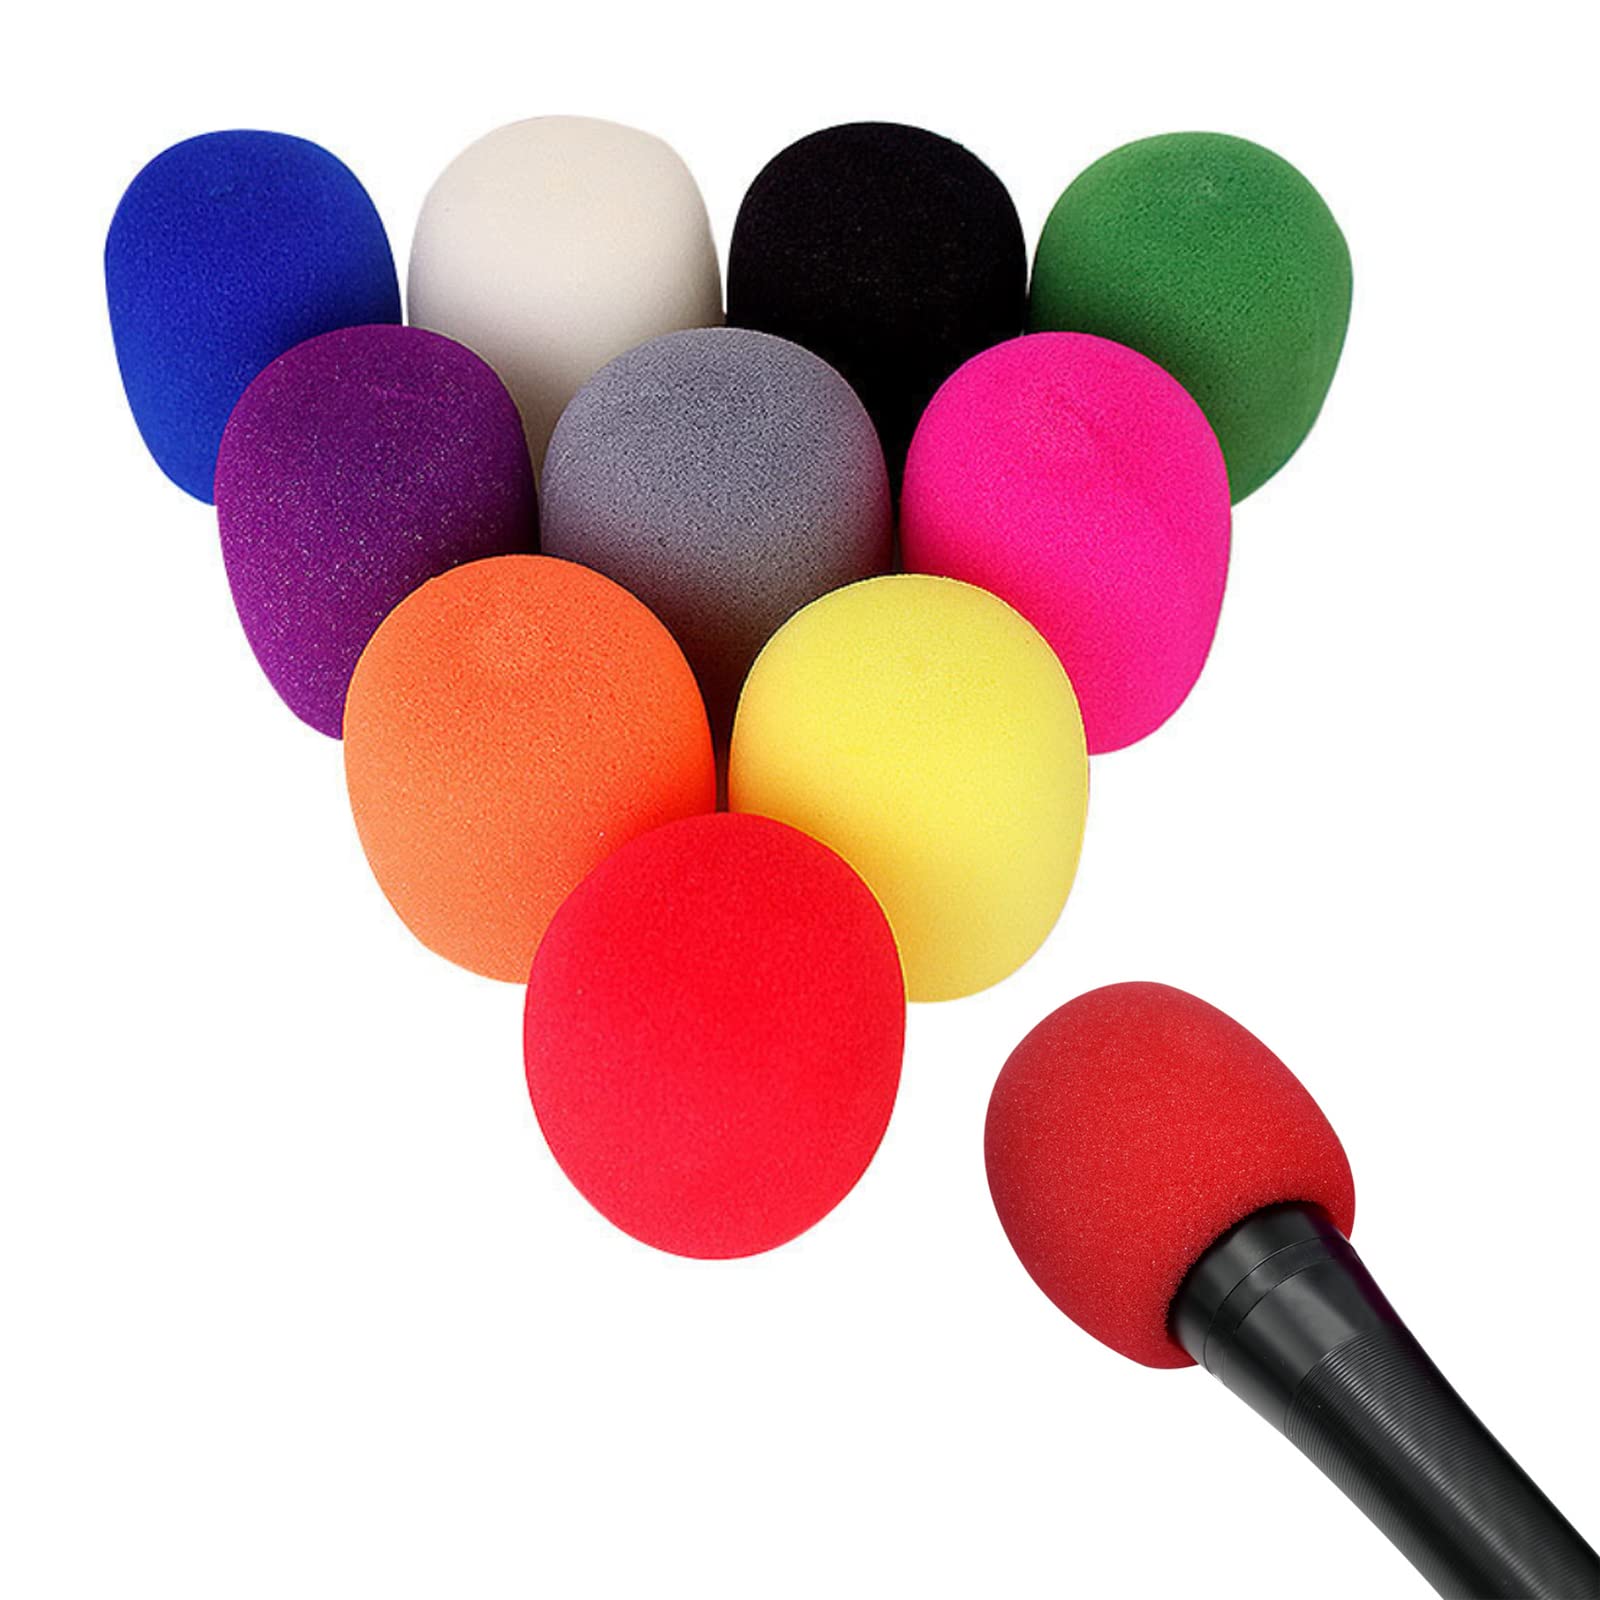 20PCS Thick Handheld Stage Microphone Windscreen Colorful Microphone Covers Reusable Foam Covers Micro Foam Filter for Most Microphone